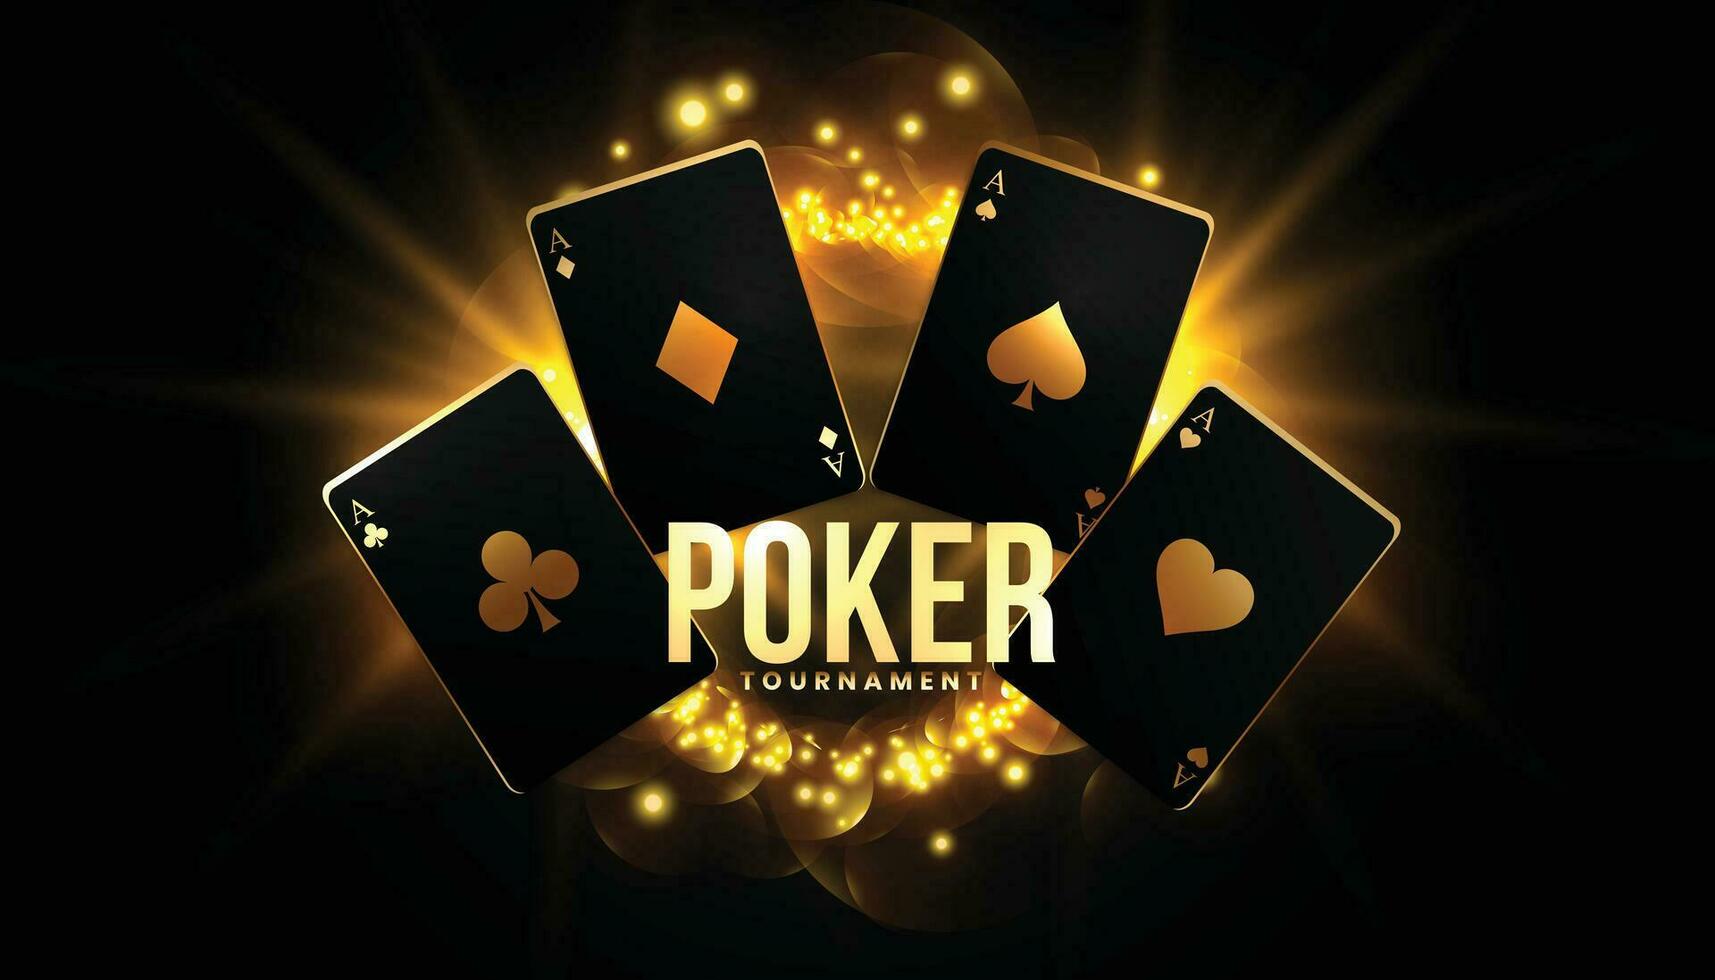 poker game background with playing cards vector